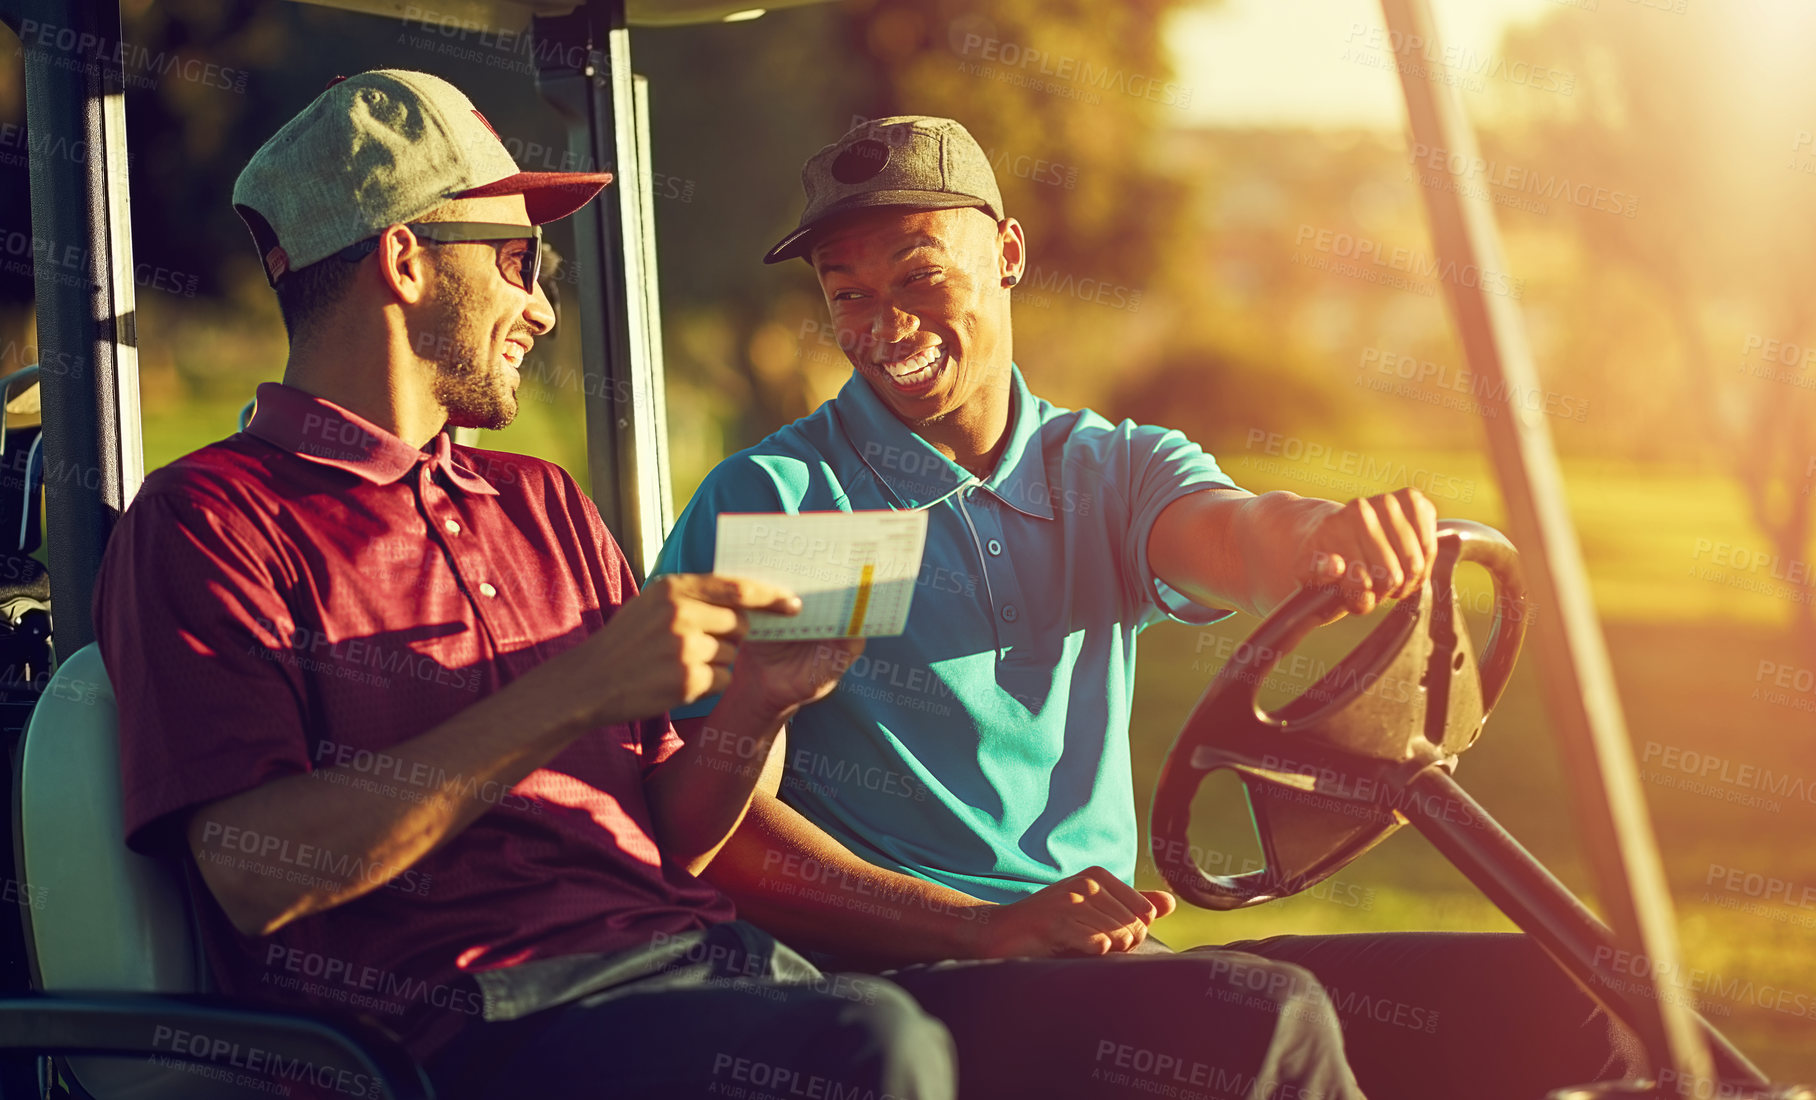 Buy stock photo Shot of two golfers riding in a cart on a golf course